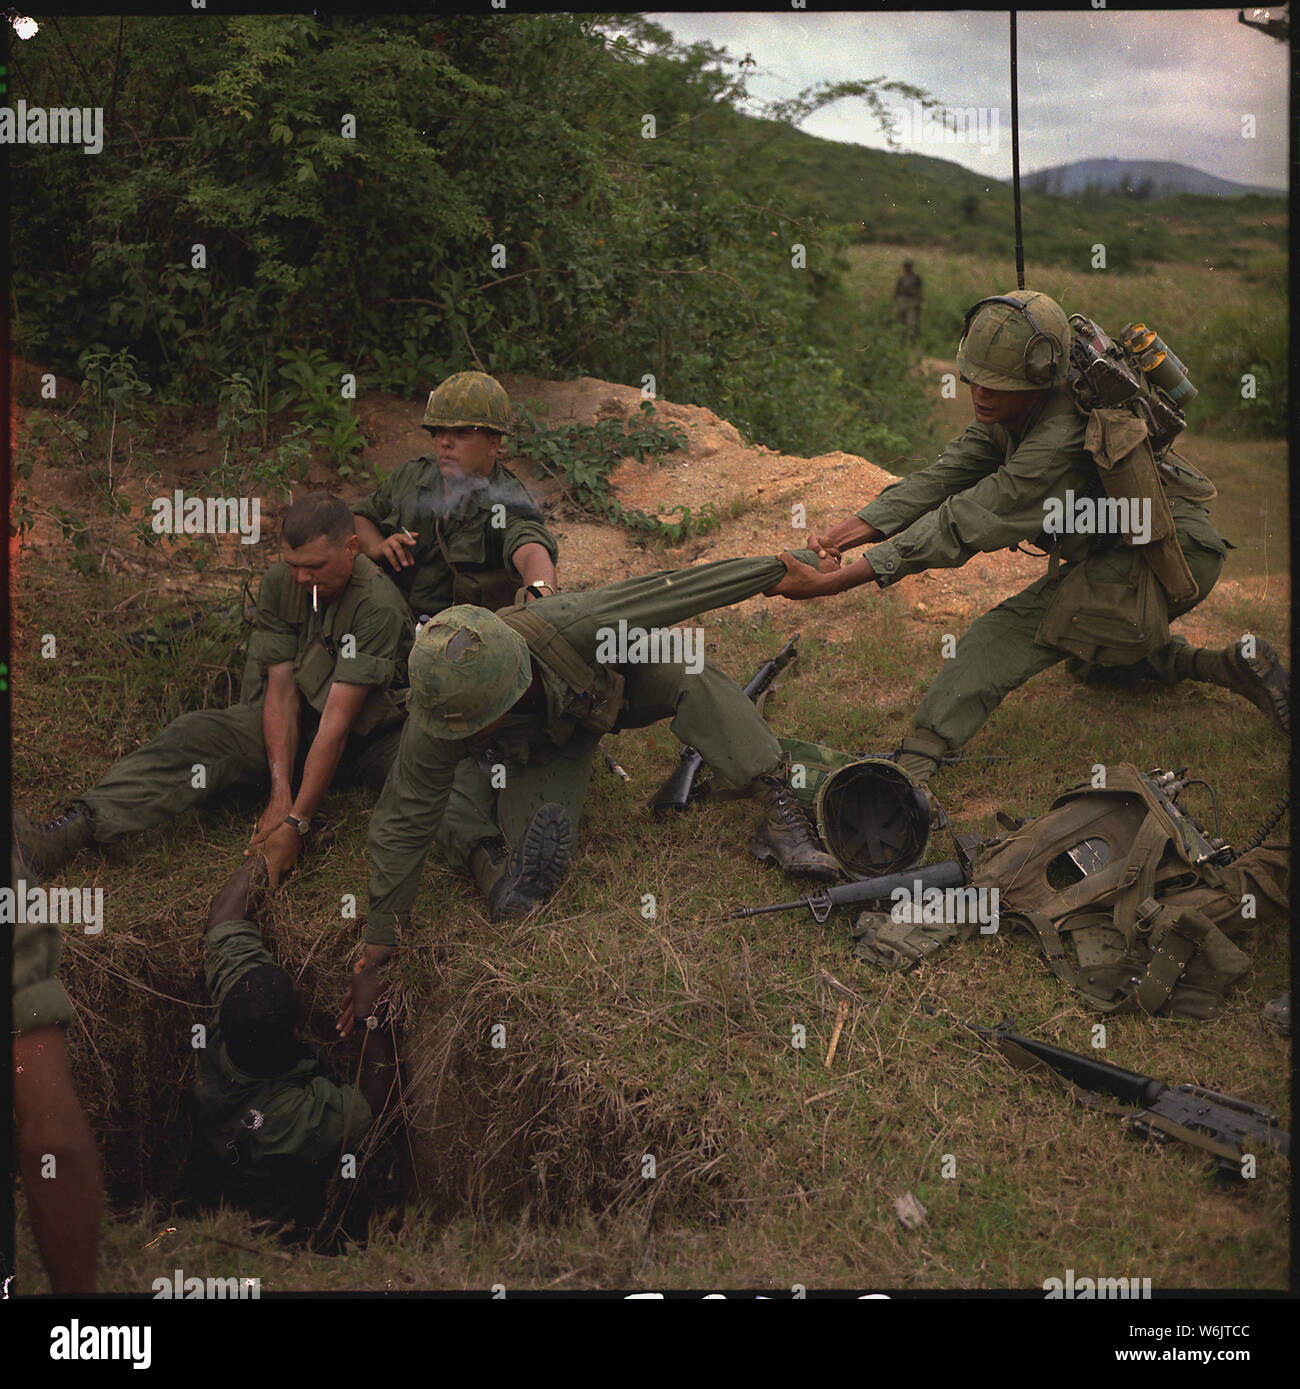 Operation Oregon, a search and destroy mission conducted by an infantry platoon of Troop B, 1st Reconnaissance Squadron, 9th Cavalry, 1st Cavalry Division (Airmobile), three kilometers west of Duc Pho, Quang Ngai Province. An infantryman is lowered into a tunnel by members of the reconnaissance platoon. Stock Photo